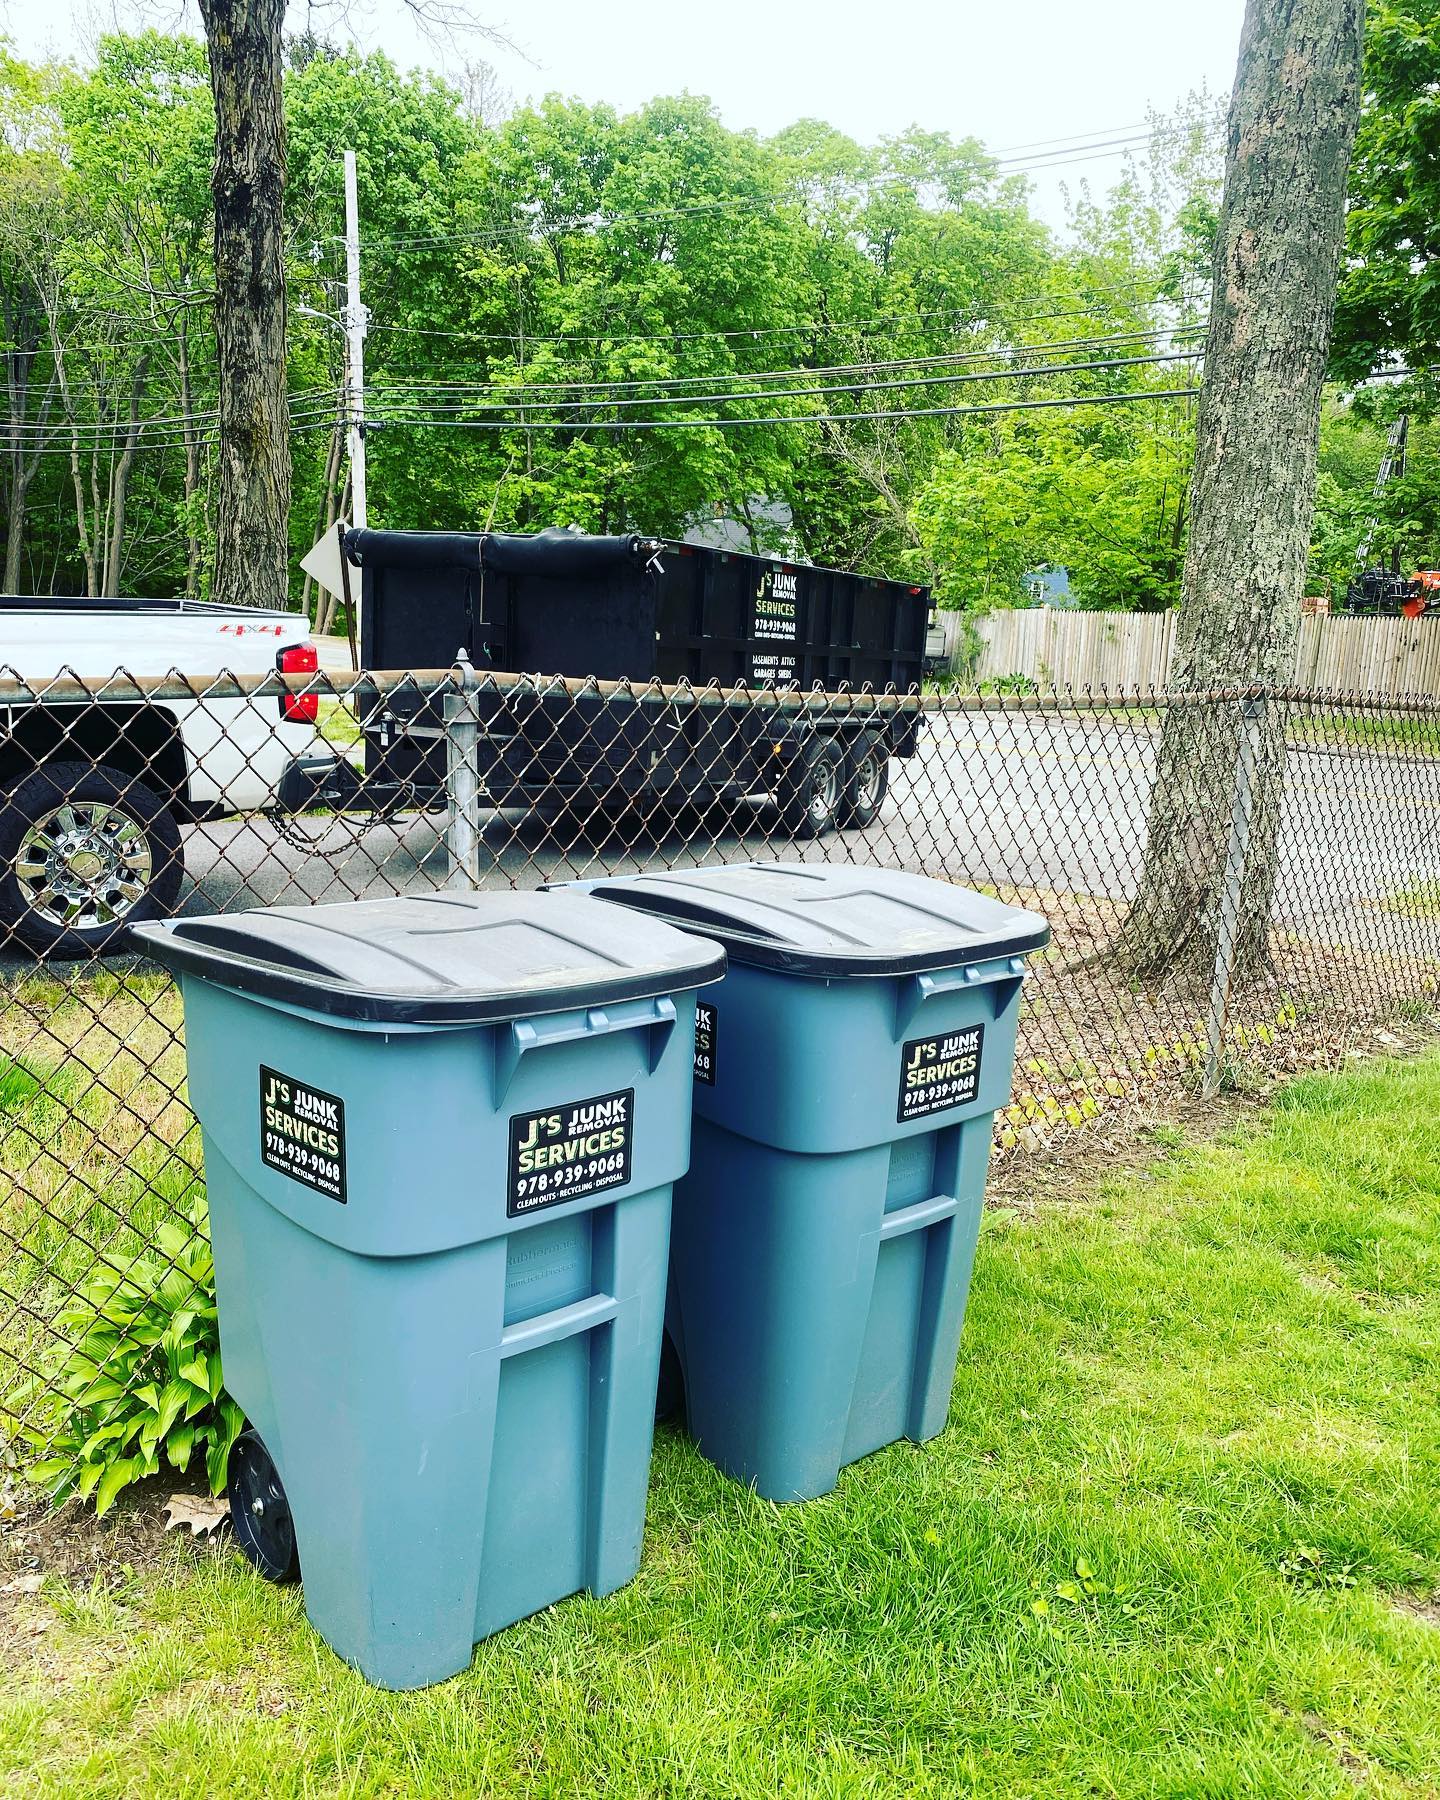 Curbside collection bins